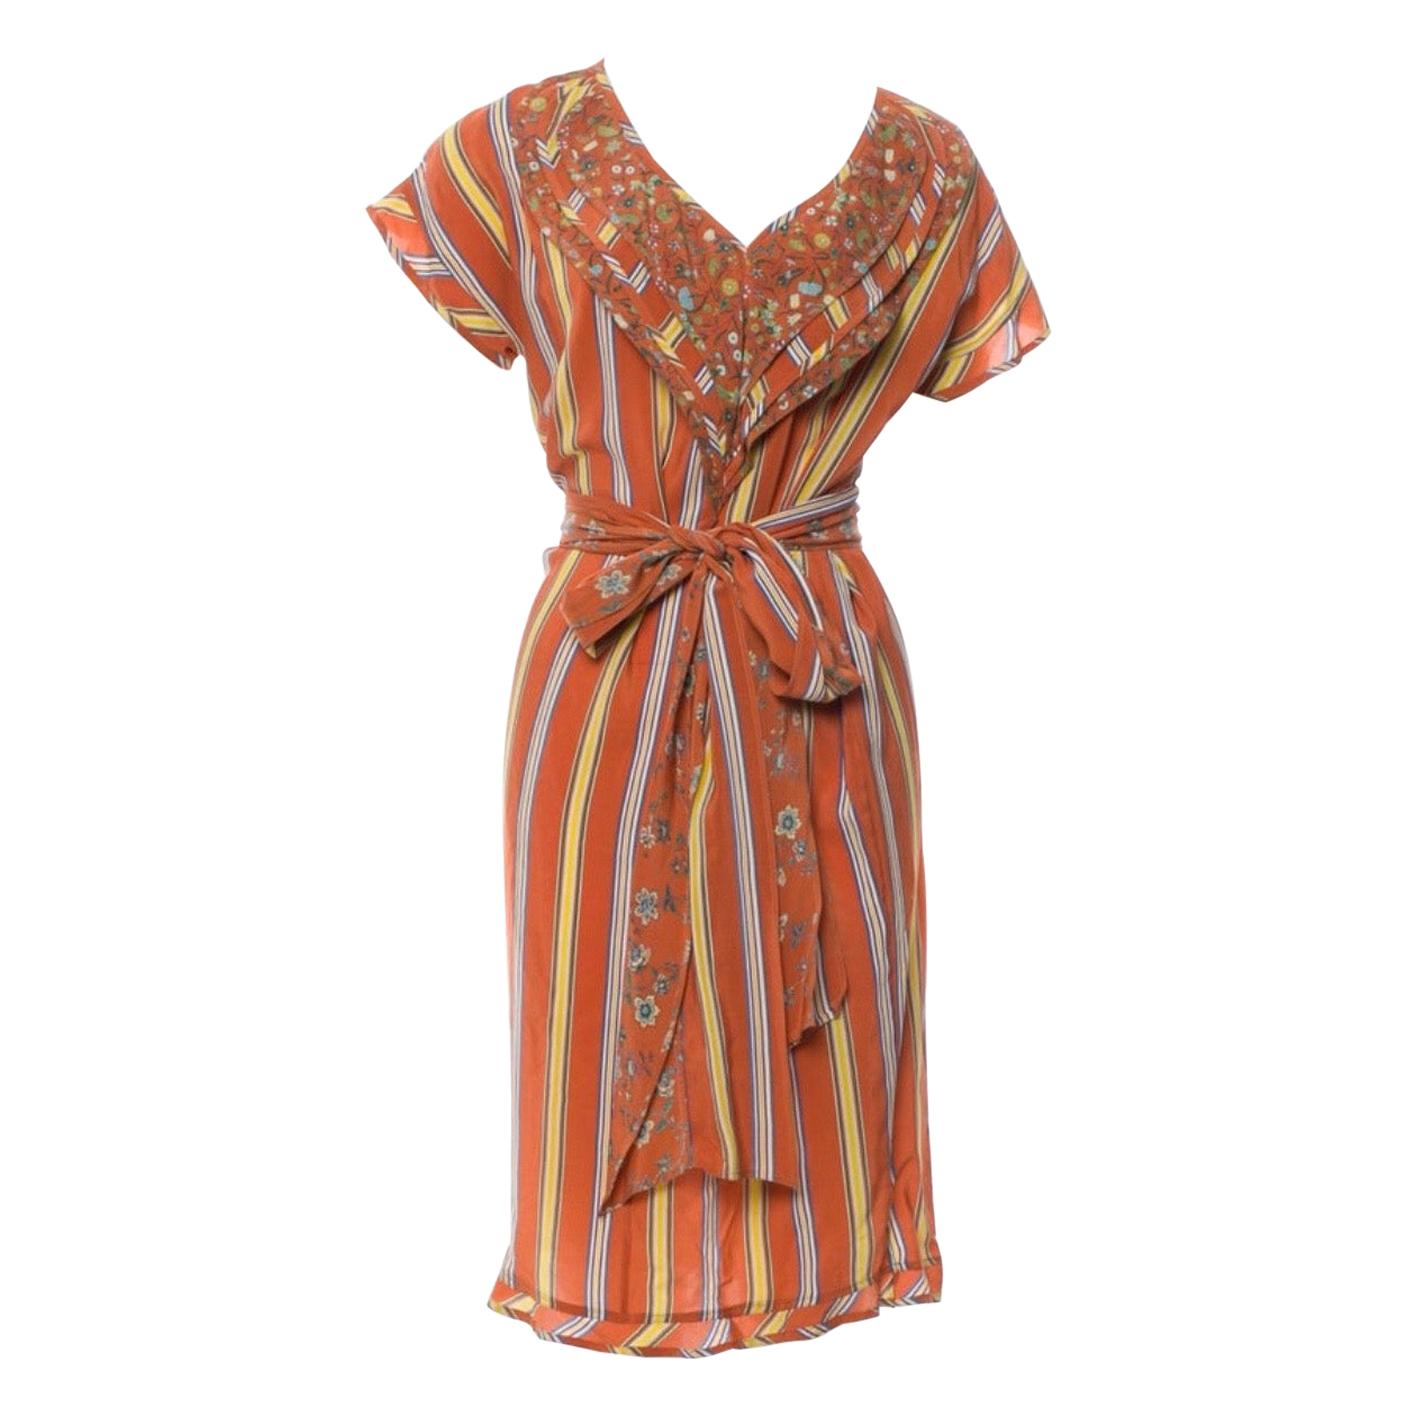 Gianni Versace early 80s Silk Striped and Floral Dress